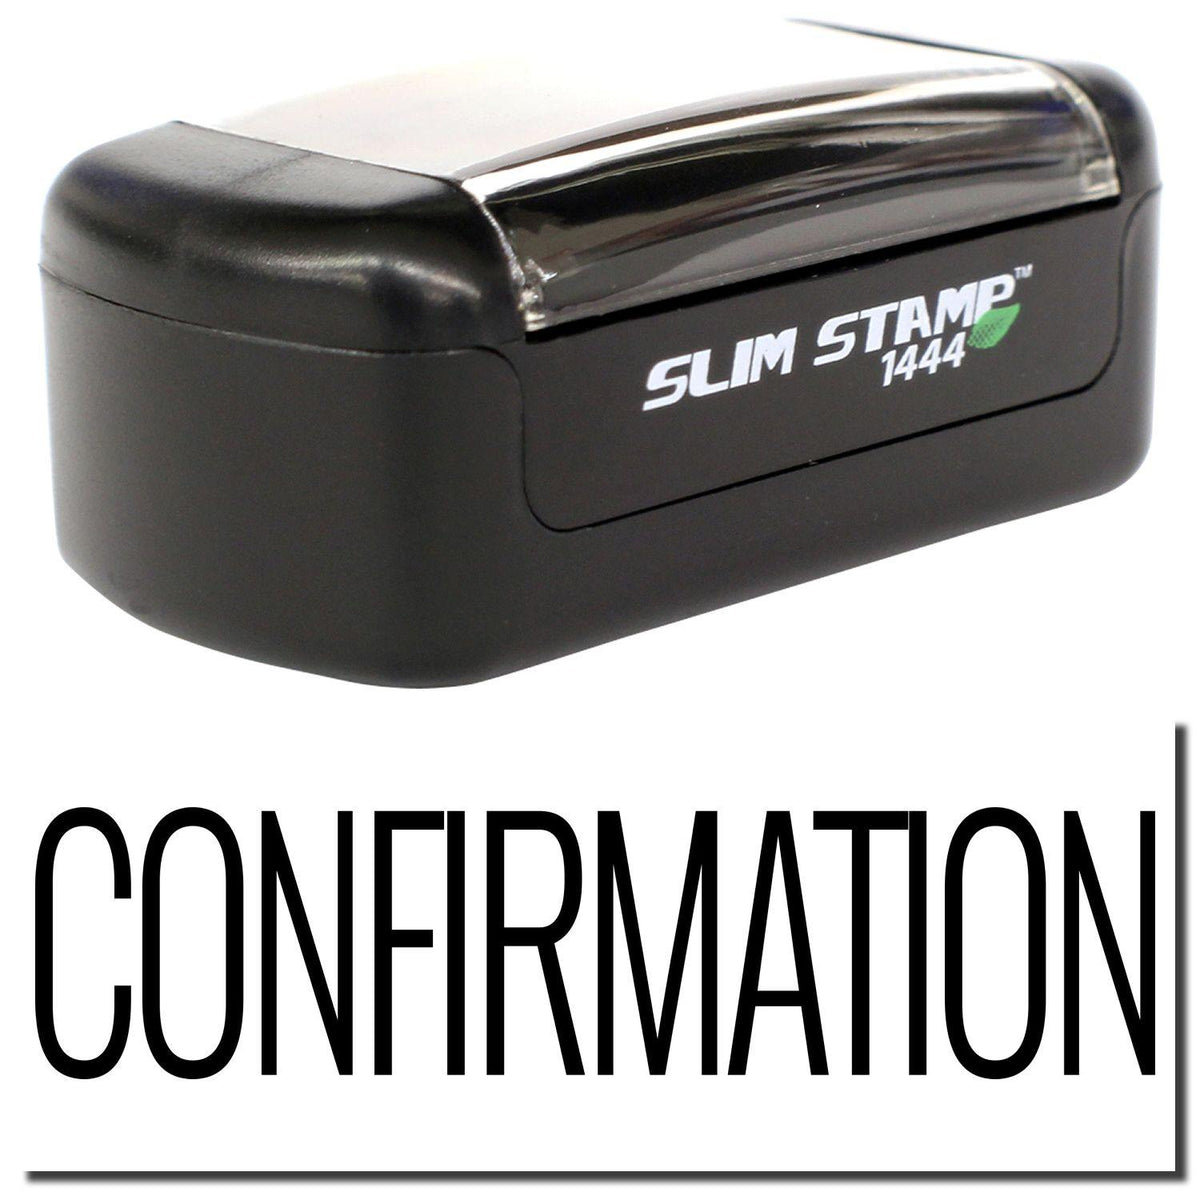 A stock office pre-inked stamp with a stamped image showing how the text &quot;CONFIRMATION&quot; is displayed after stamping.